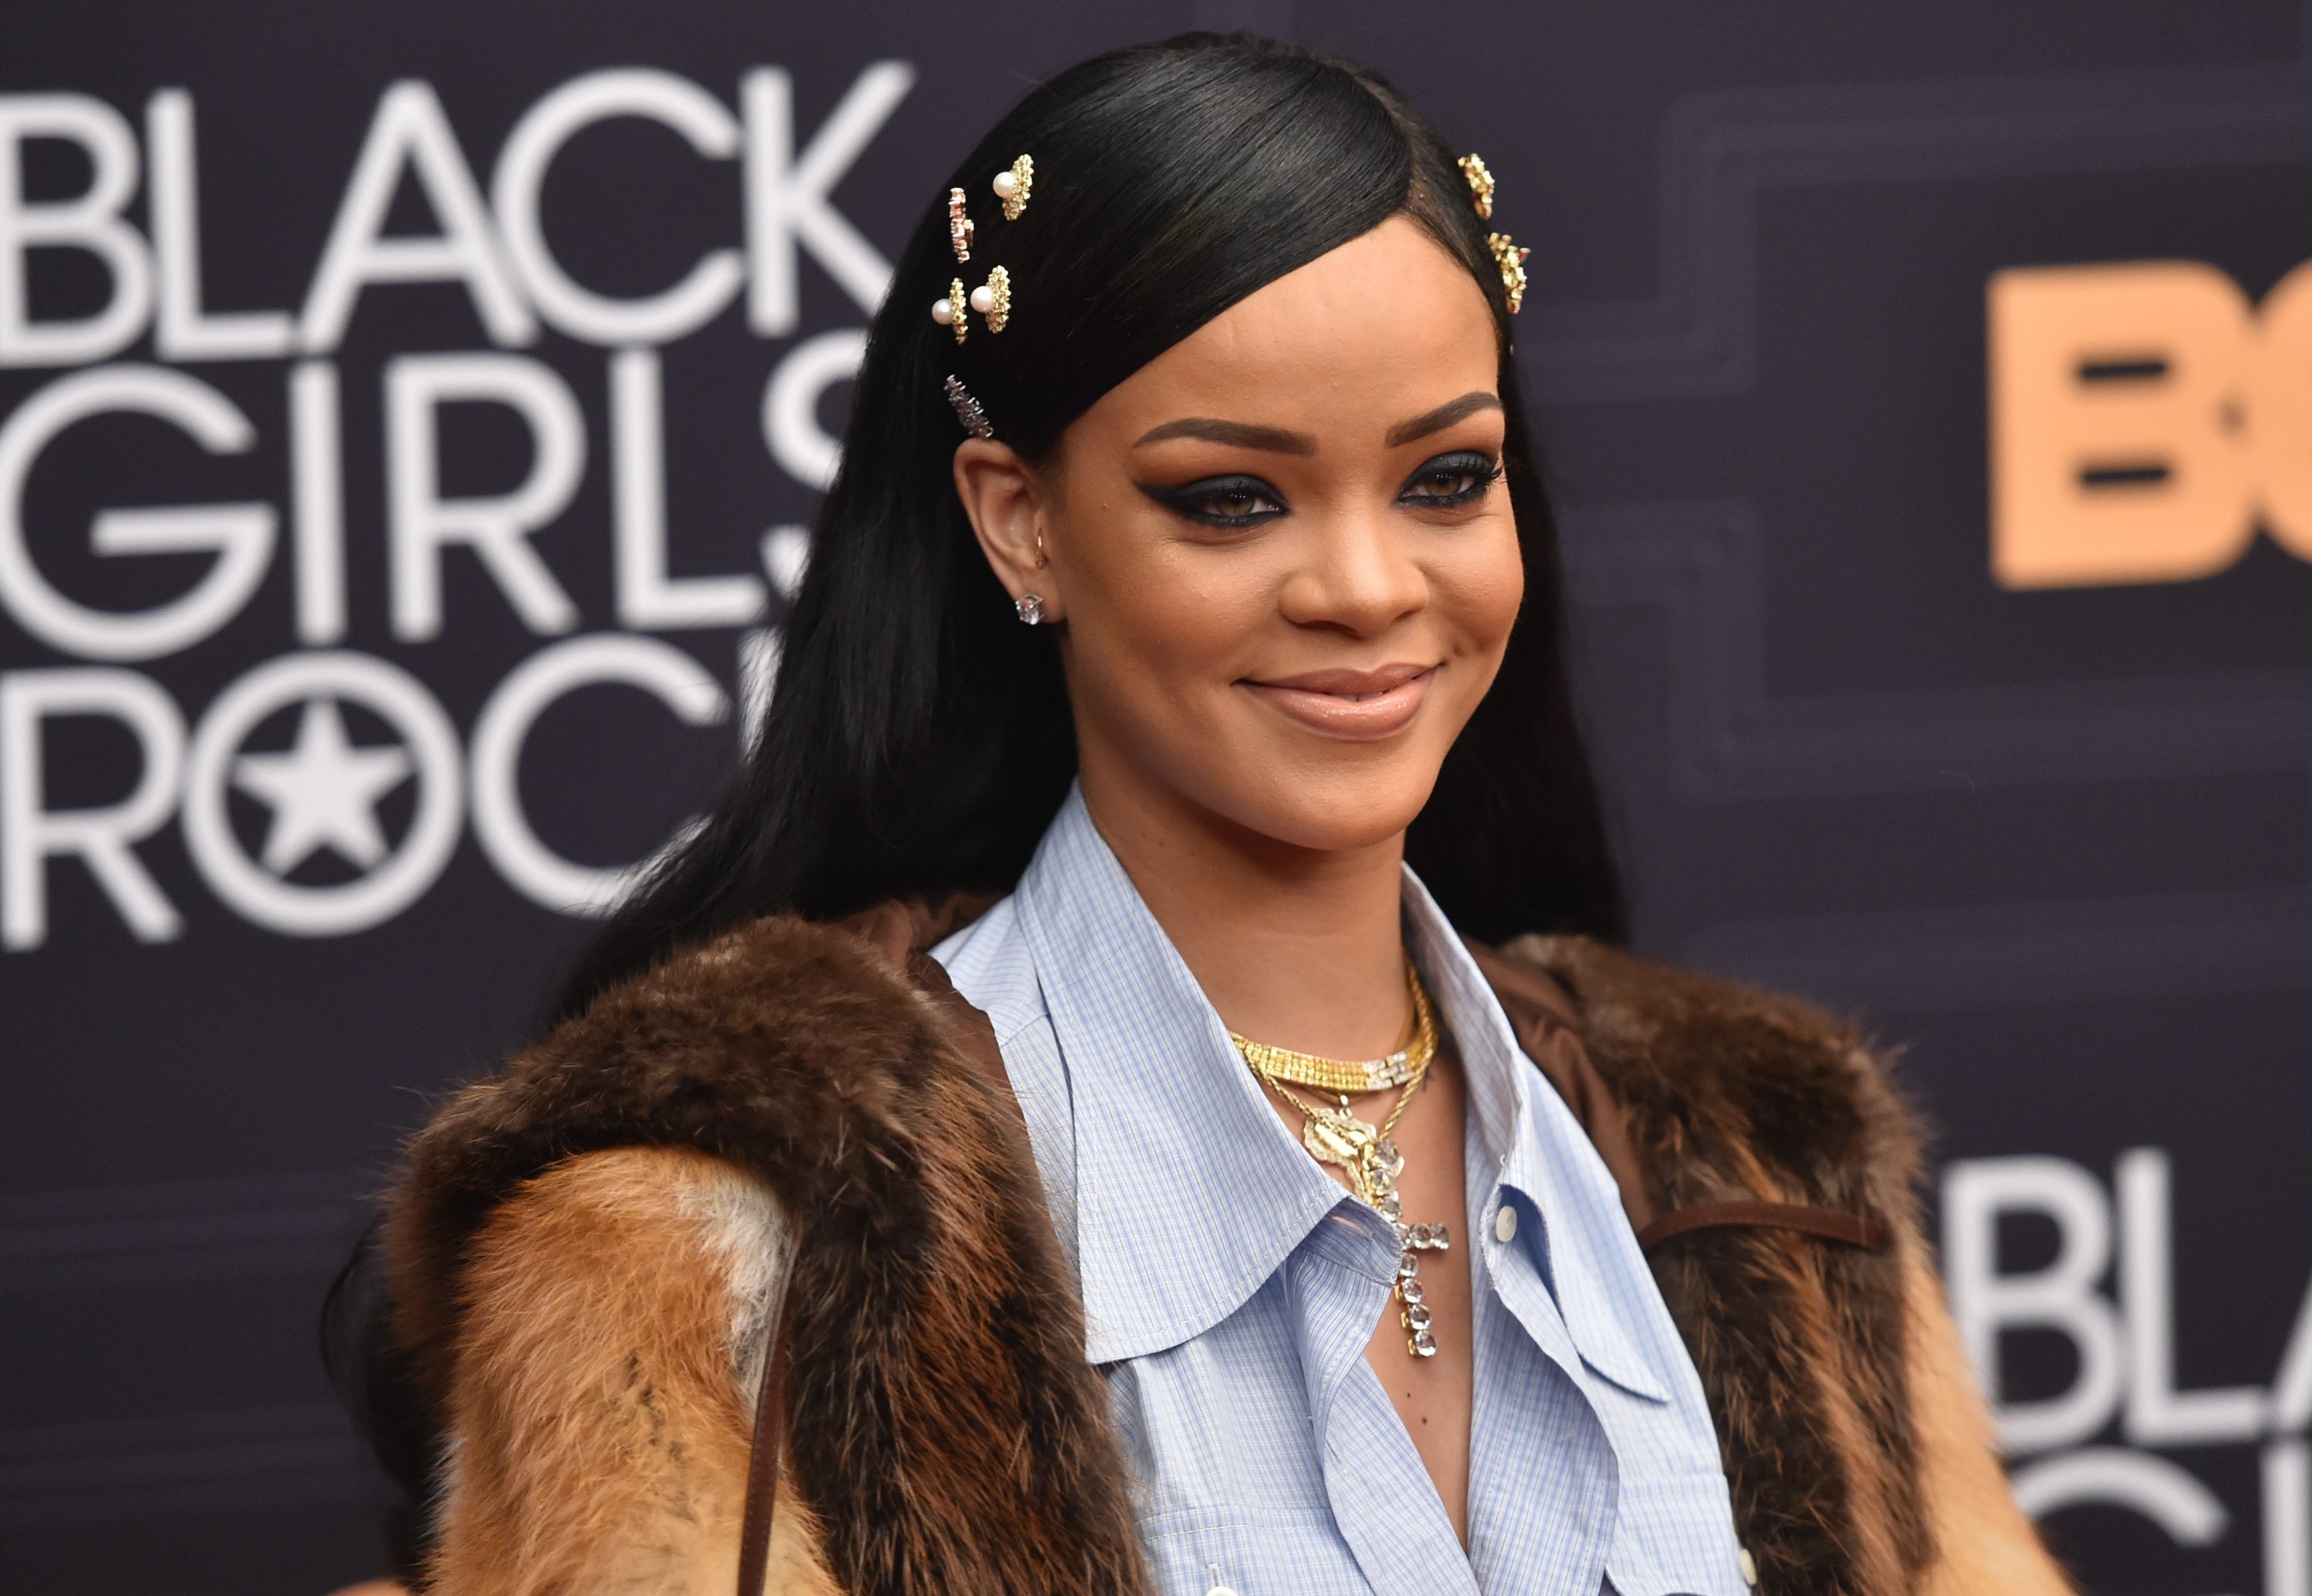 Rihanna attends Black Girls Rock! 2016 in Newark, New Jersey. (Photo by Paras Griffin/Getty Images) (Paras Griffin--Getty Images)